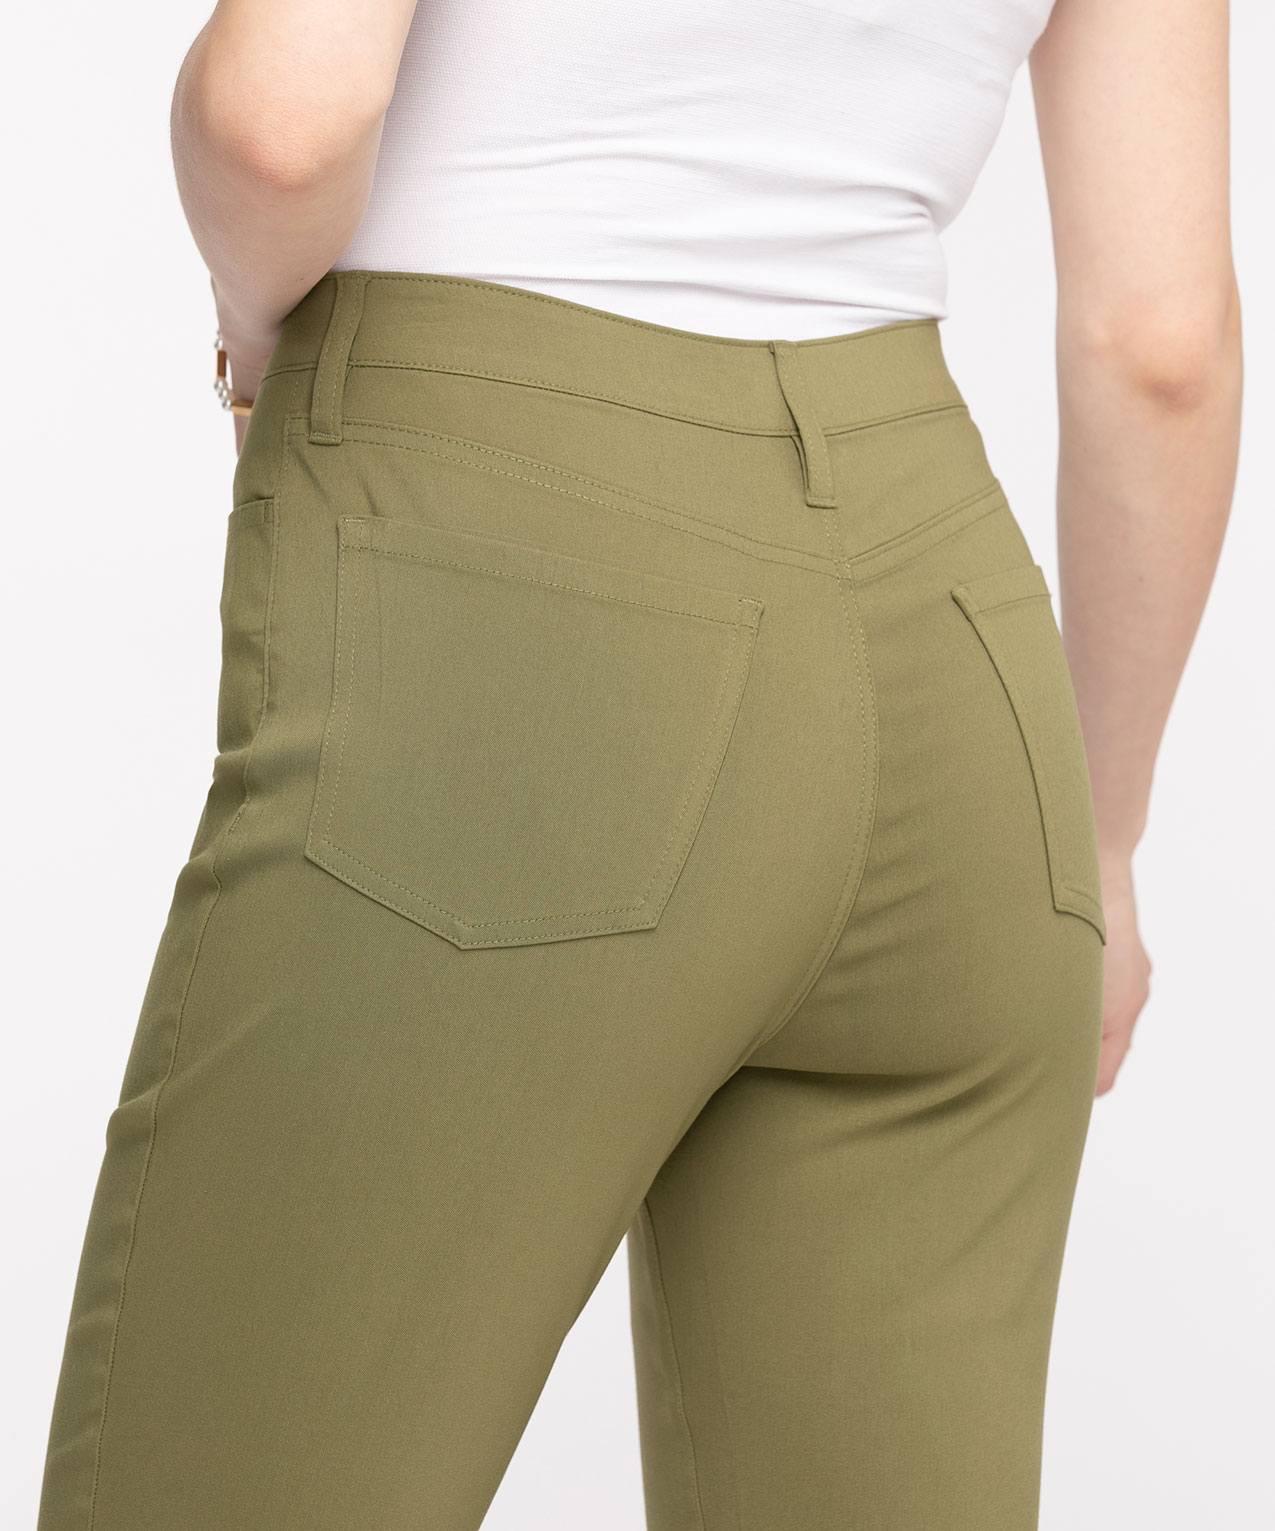 RICKI'S Microtwill Pull-On Crop Pant